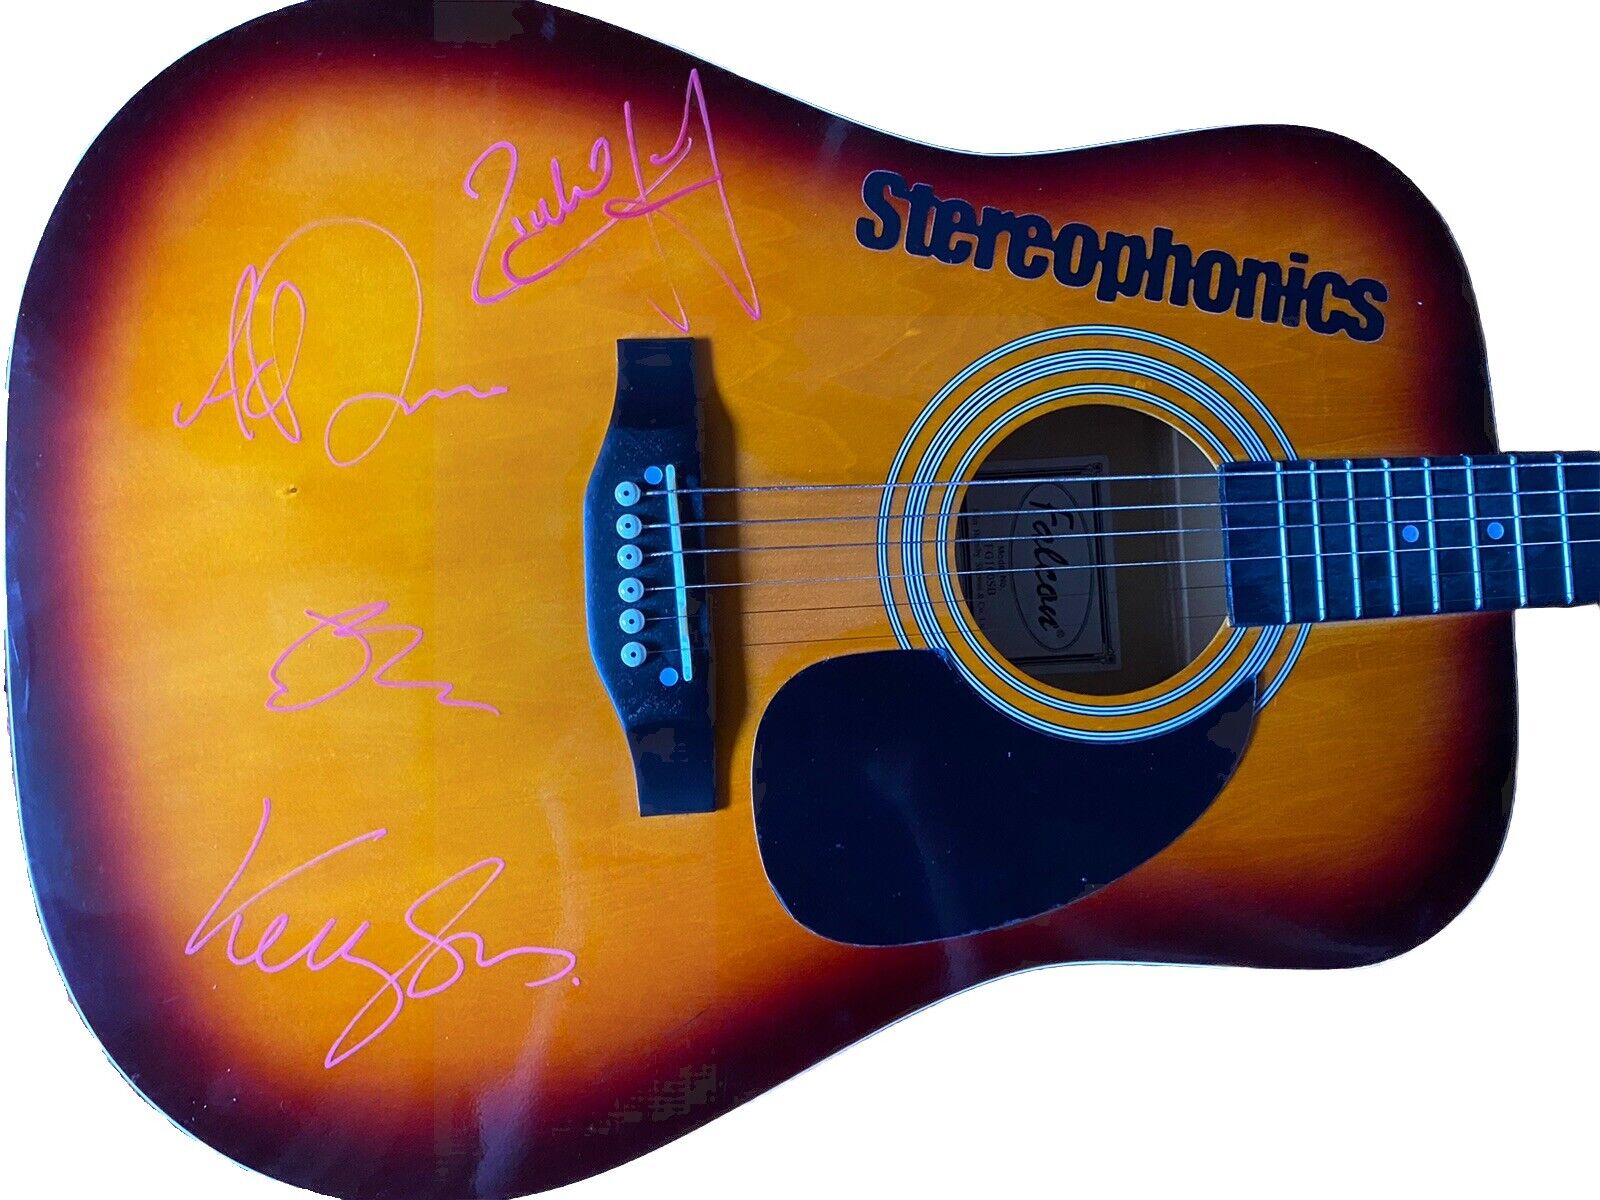 Stereophonics    **HAND SIGNED**  Full Size Acoustic Guitar - AUTOGRAPHED